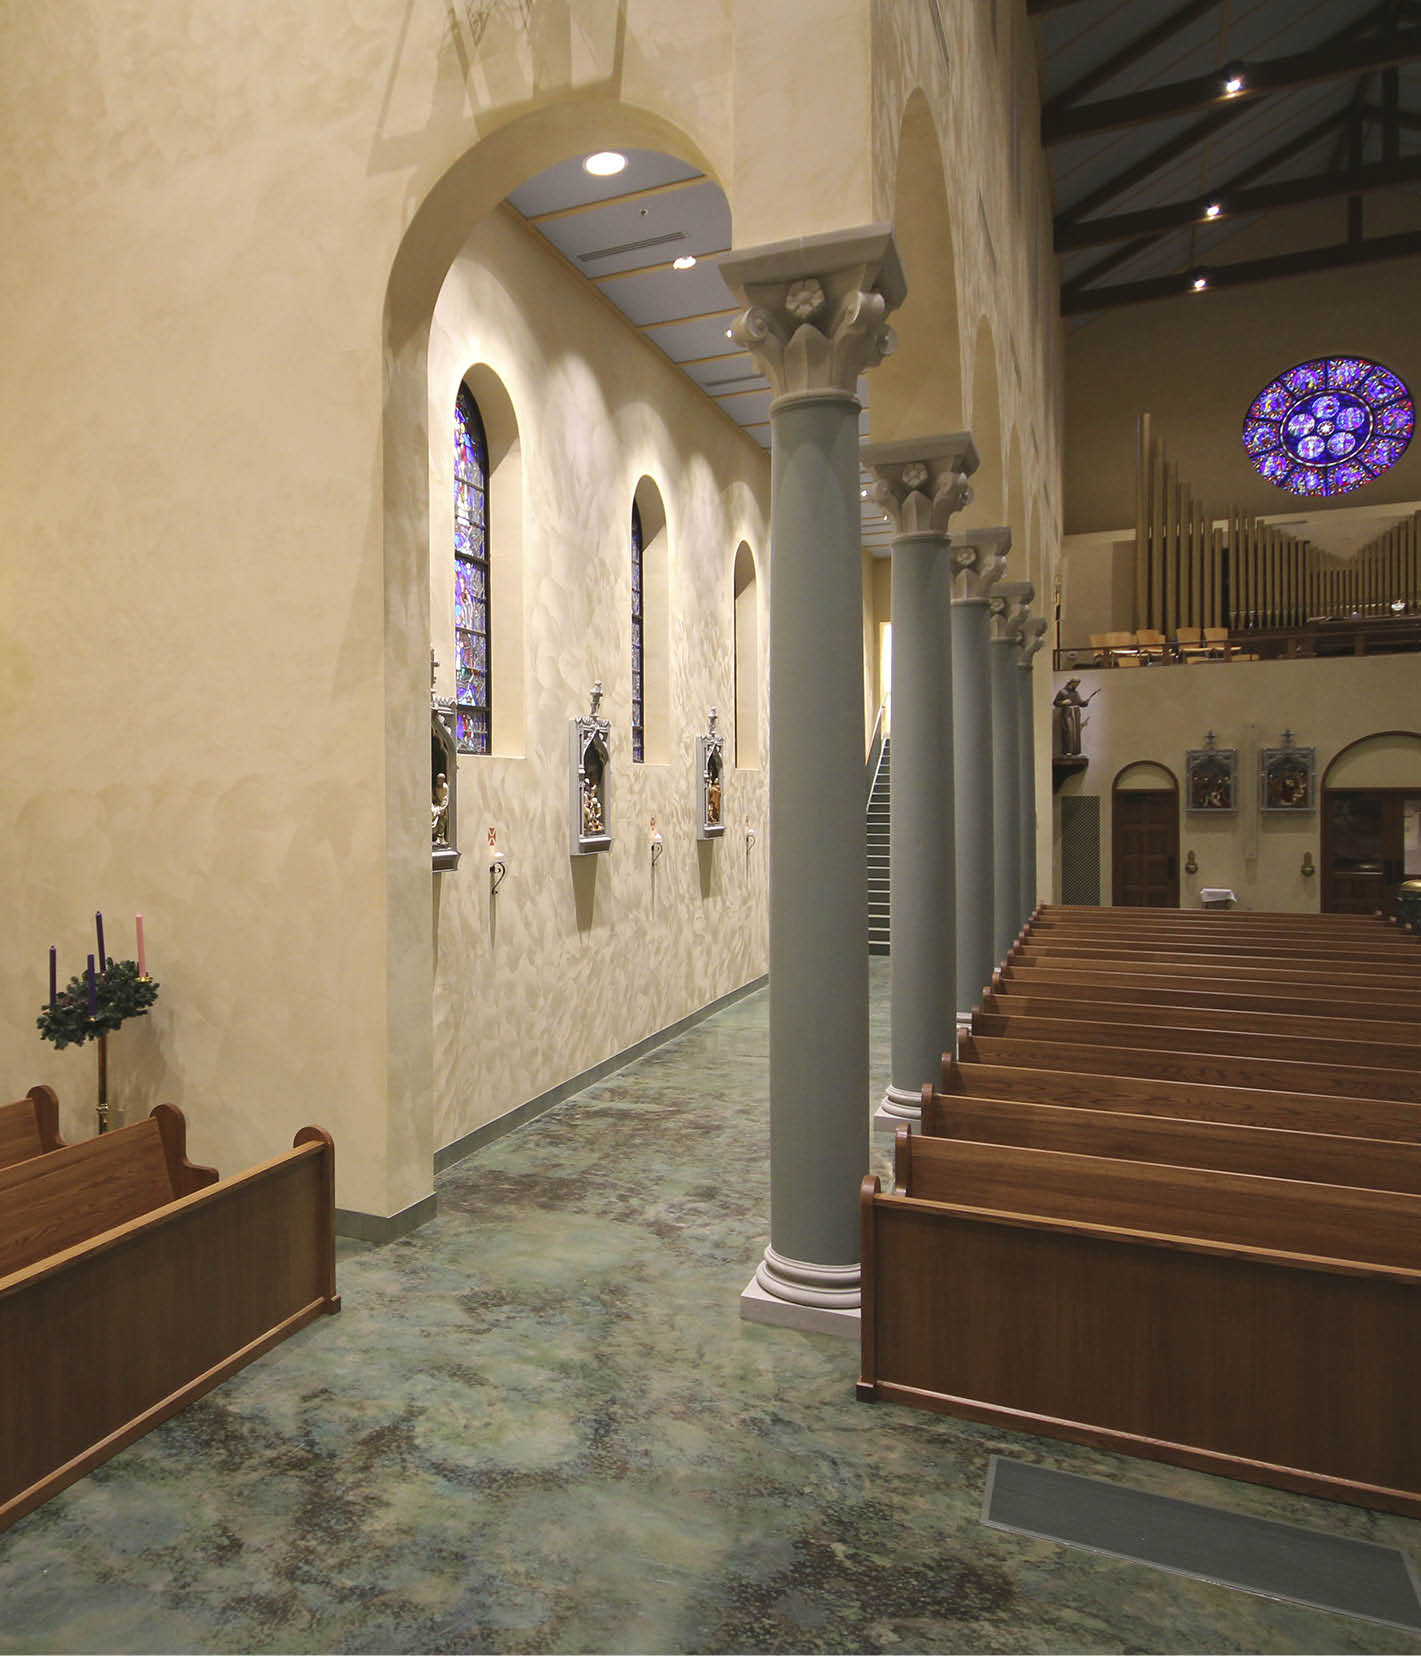 CarolinaCommanding attention on a hilltop in Greenville, South Carolina, the new Our Lady of the Rosary church is as impressive inside as it is outside with soaring arches, reclaimed glass windows and a beautiful marbleized stained concrete floor.